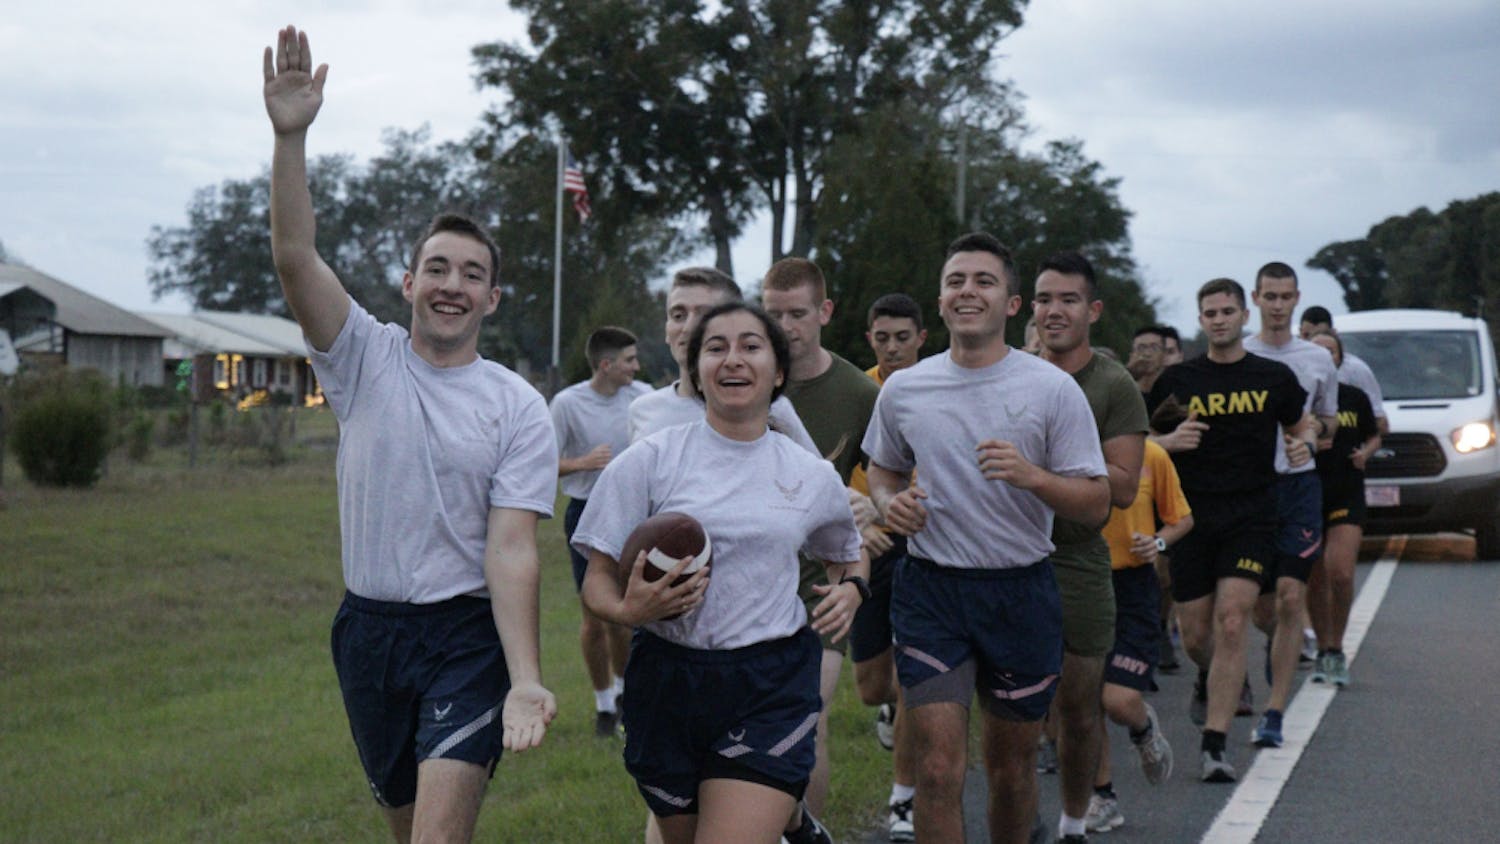 UF Air Force ROTC cadets Jake Gold (left), Destiny Cepero, and Jonathan Toledo hold the game ball during the relay on their way to Gainesville.